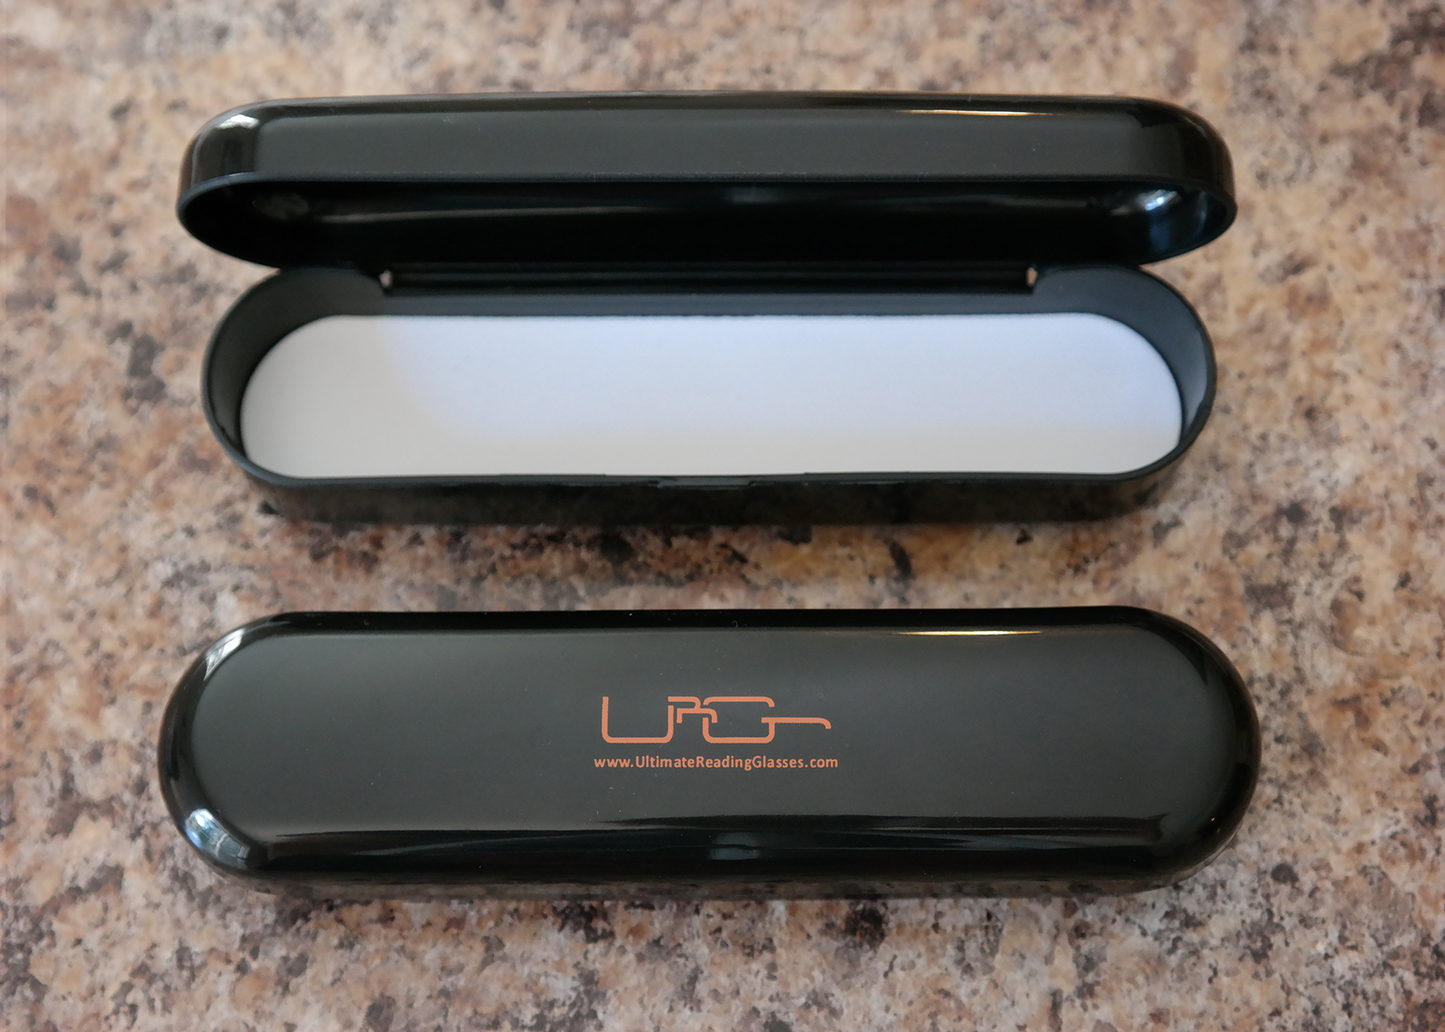 The Black Ultimate Reading Glasses hard case, resting on a table.